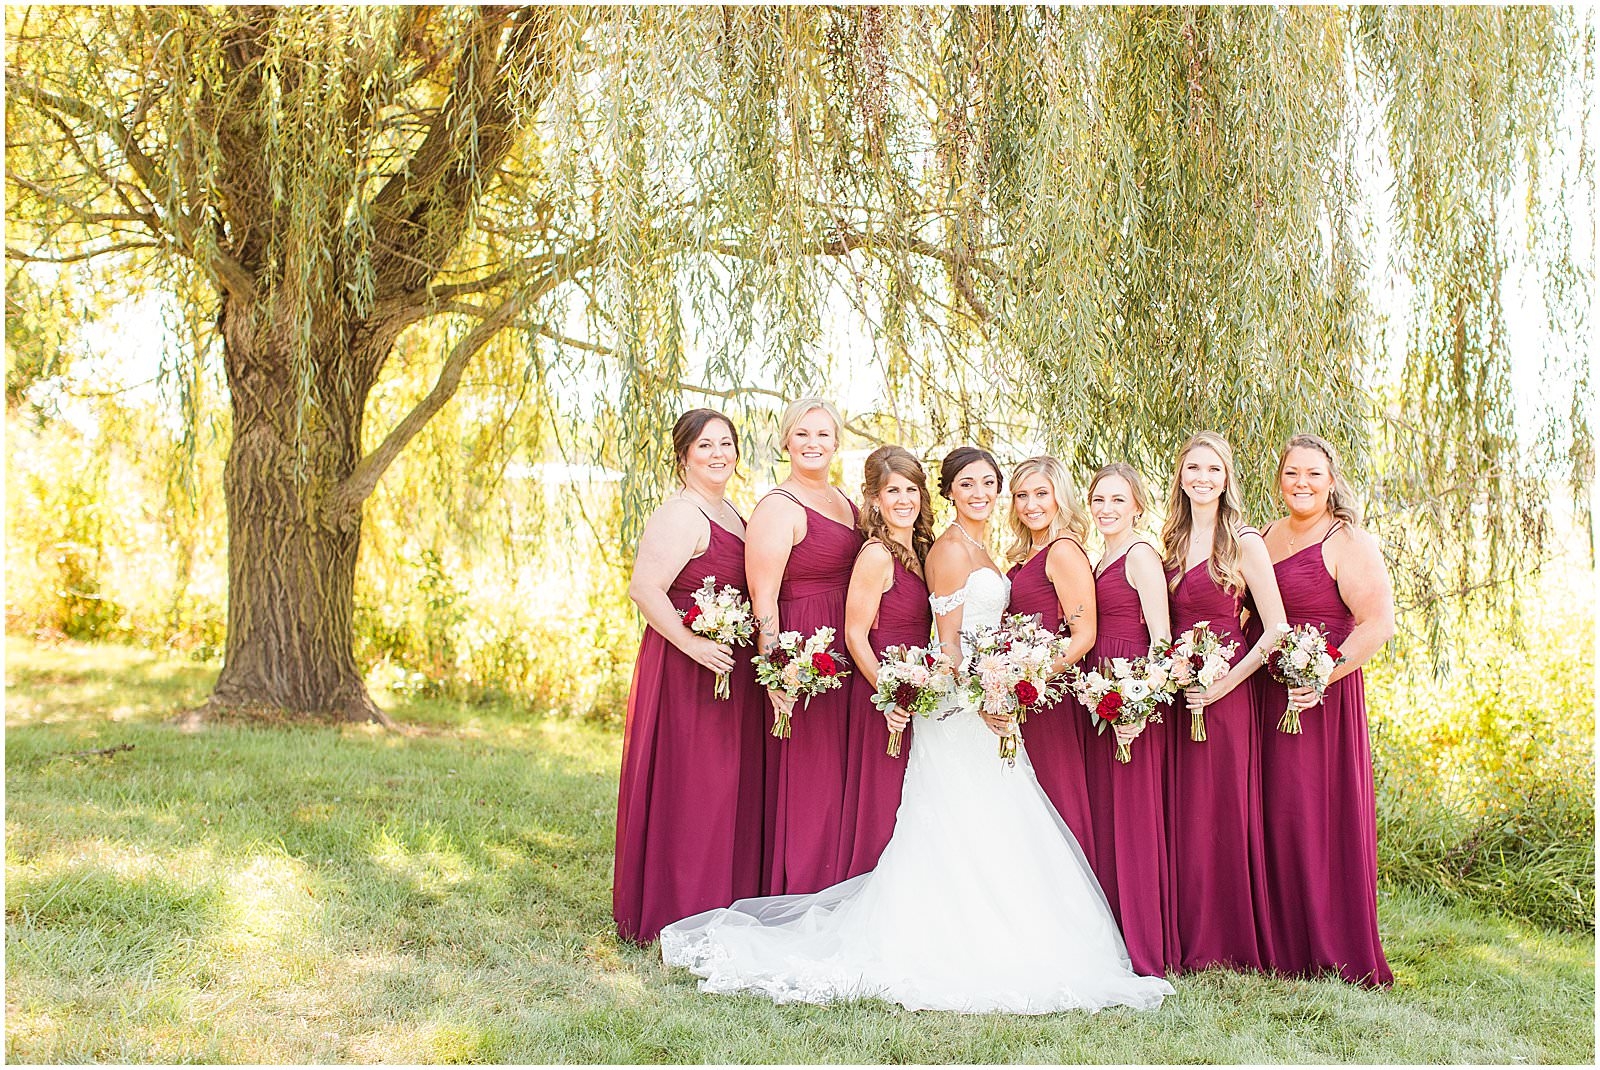 A Stunning Fall Wedding in Indianapolis, IN |. Sally and Andrew | Bret and Brandie Photography 0082.jpg